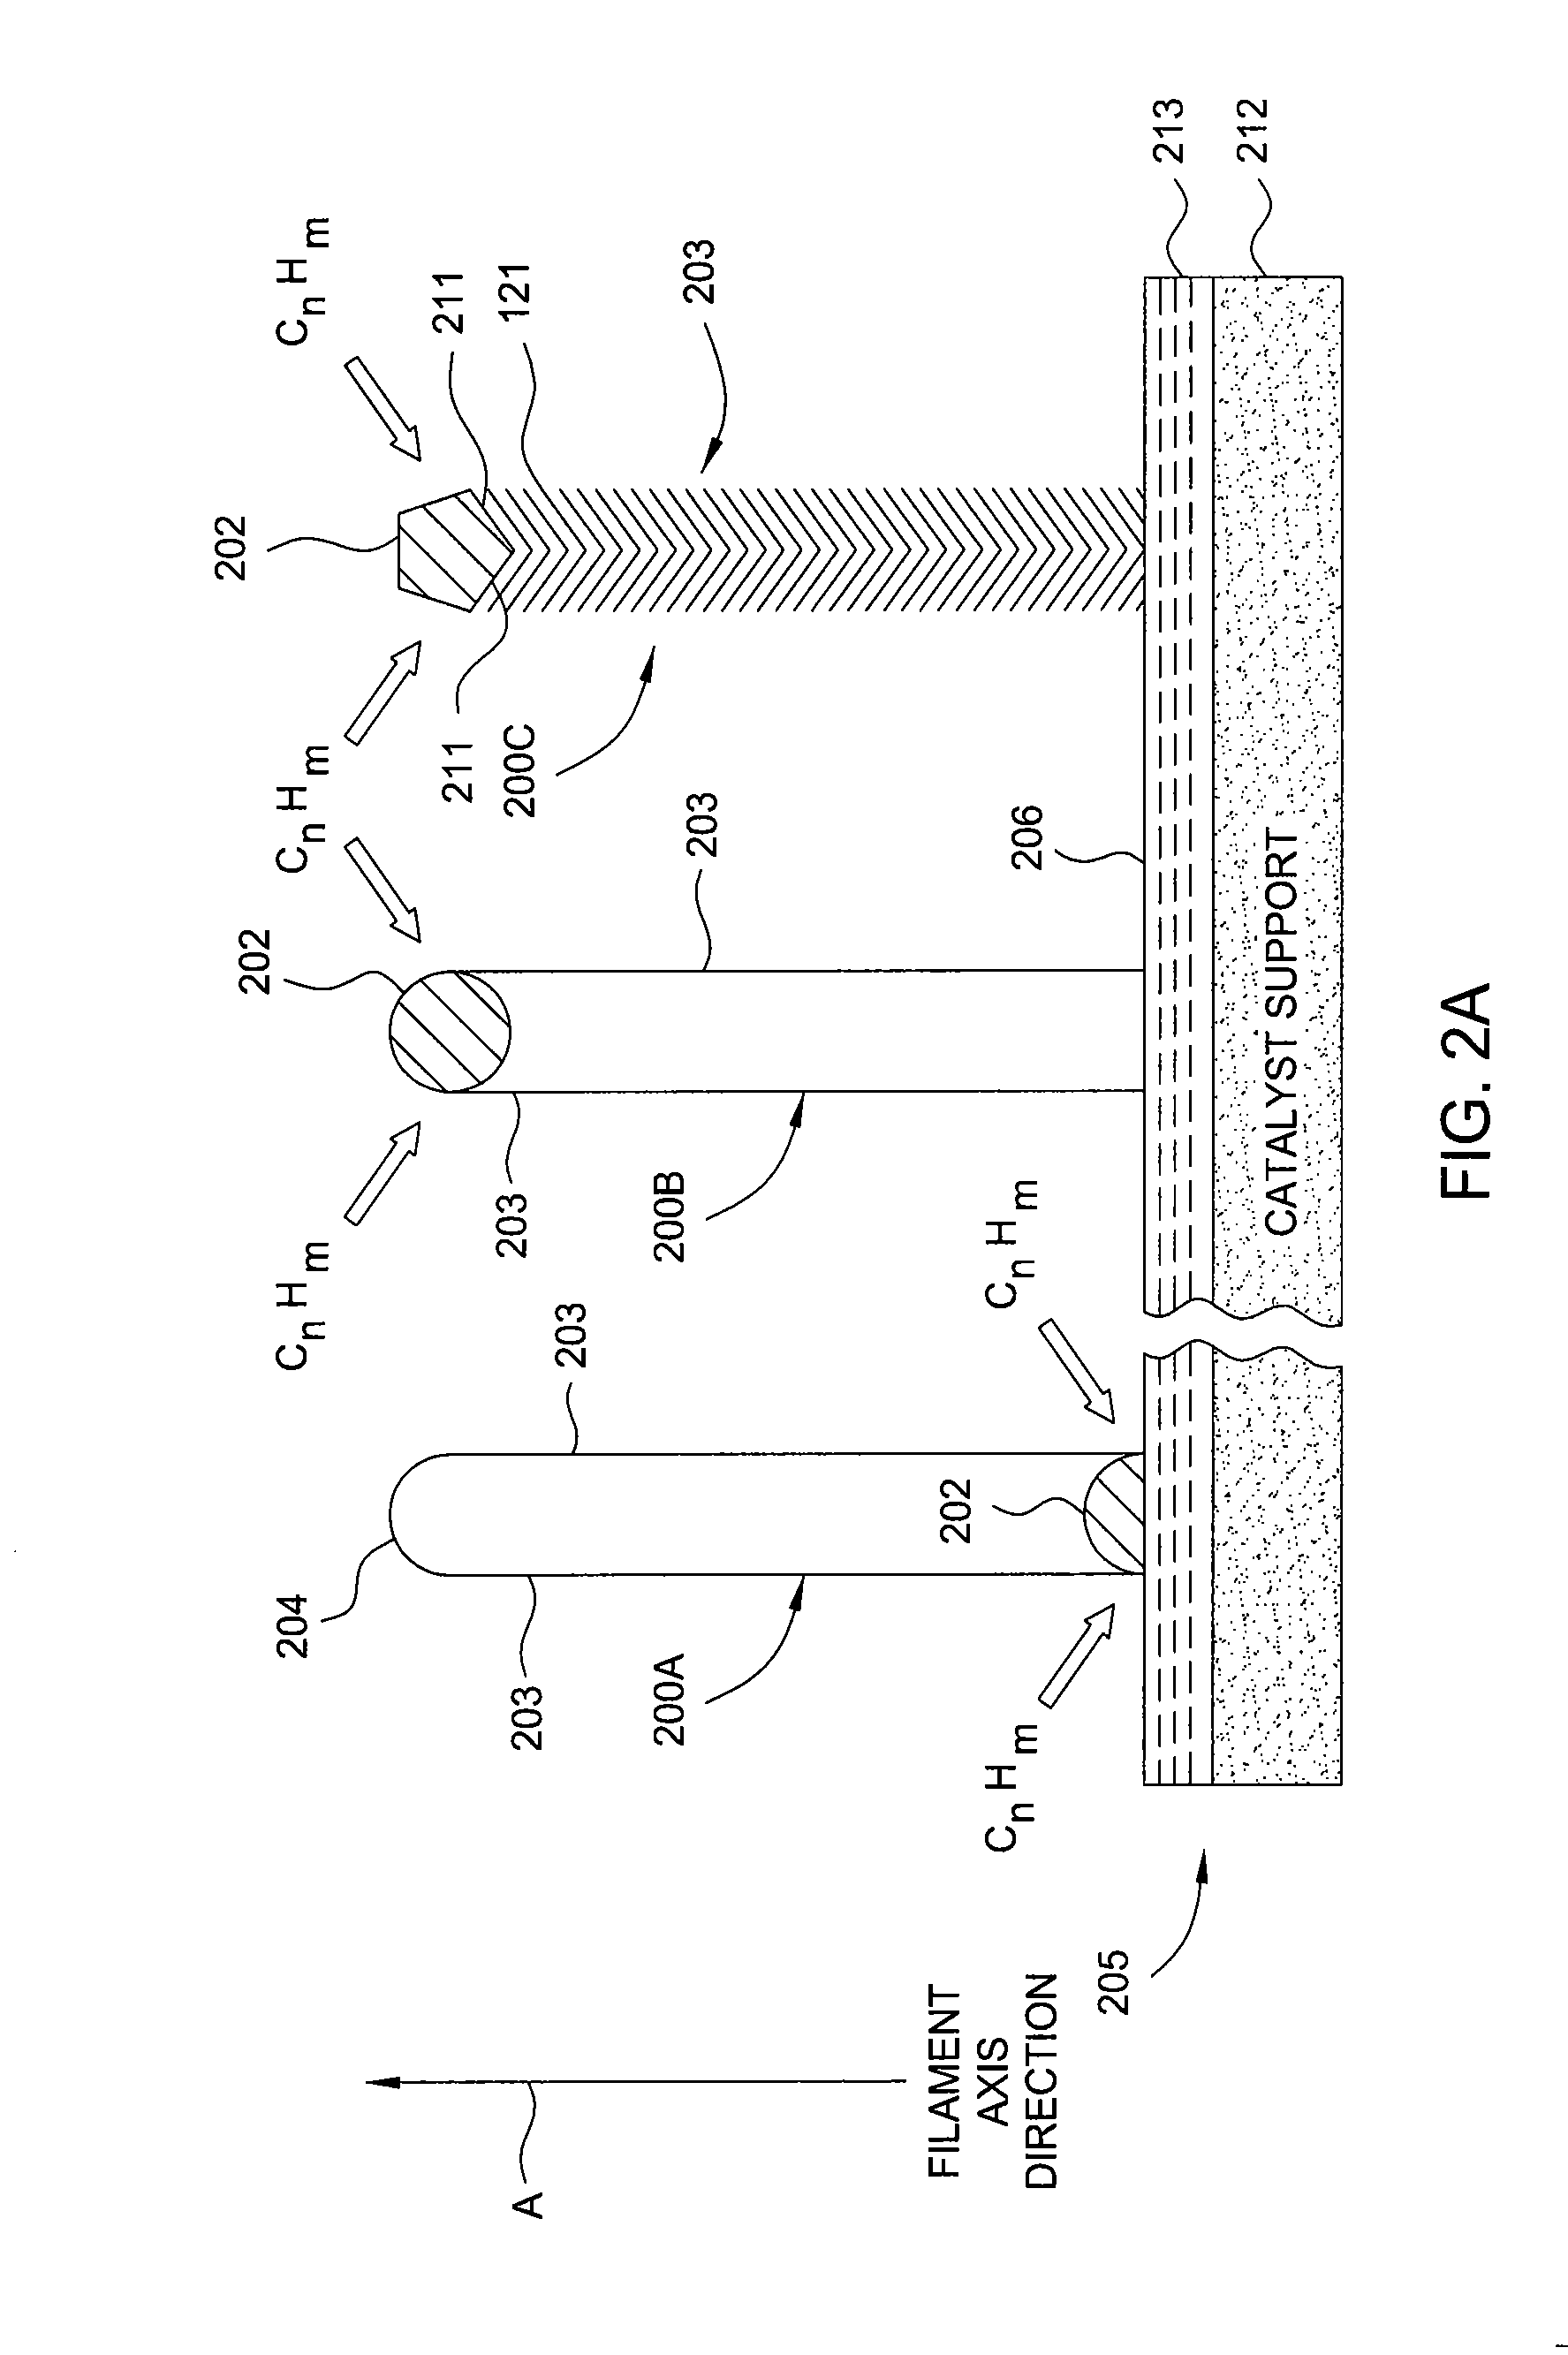 Apparatus and methods for forming energy storage and photovoltaic devices in a linear system